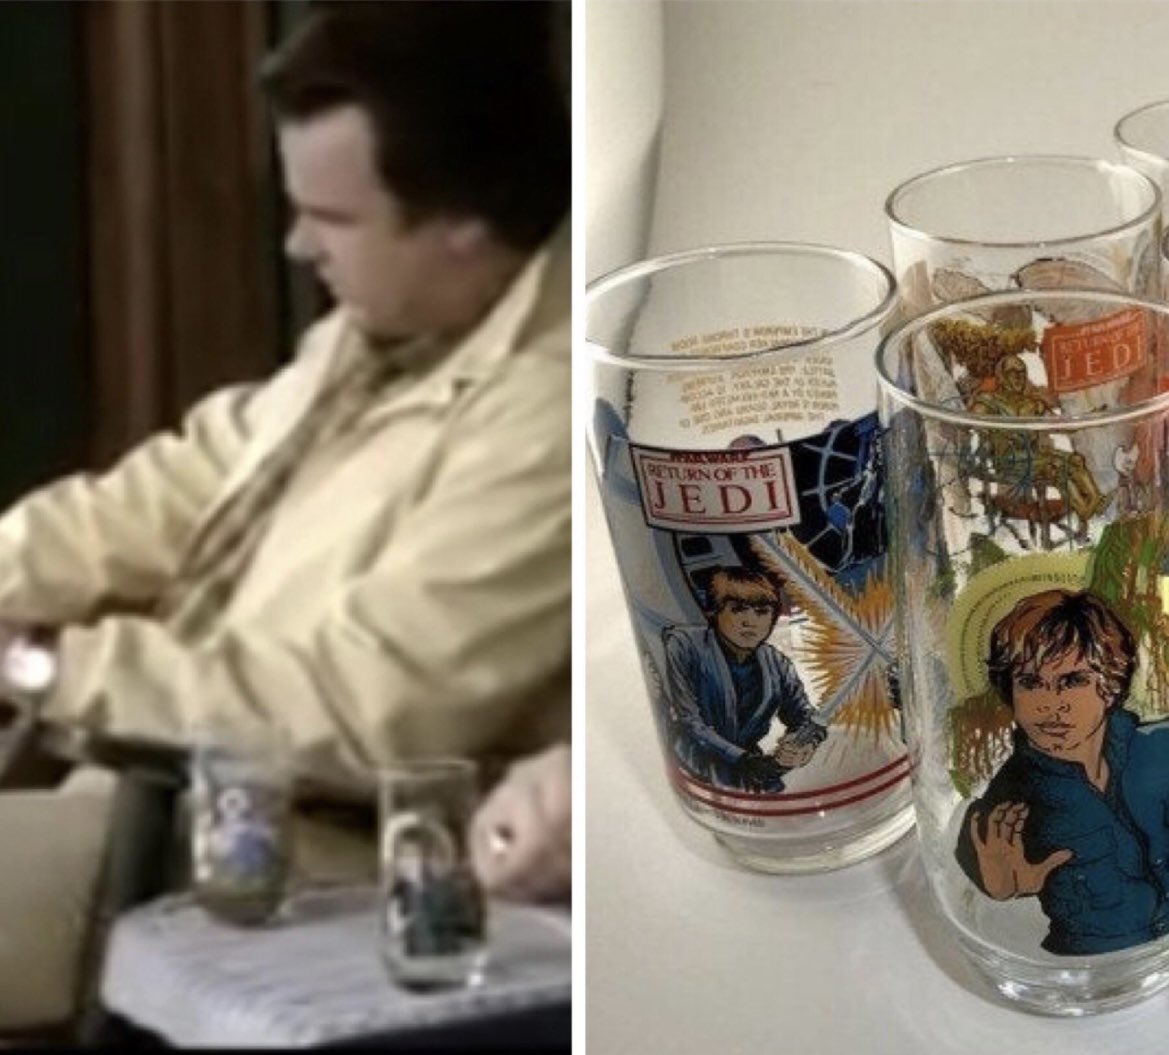 Did all you #StarWars fans know that in The Great Outdoors movie with #DanAkroyd and #JohnCandy they were drinking out of @BurgerKing #ReturnoftheJedi glasses? #ROTJ